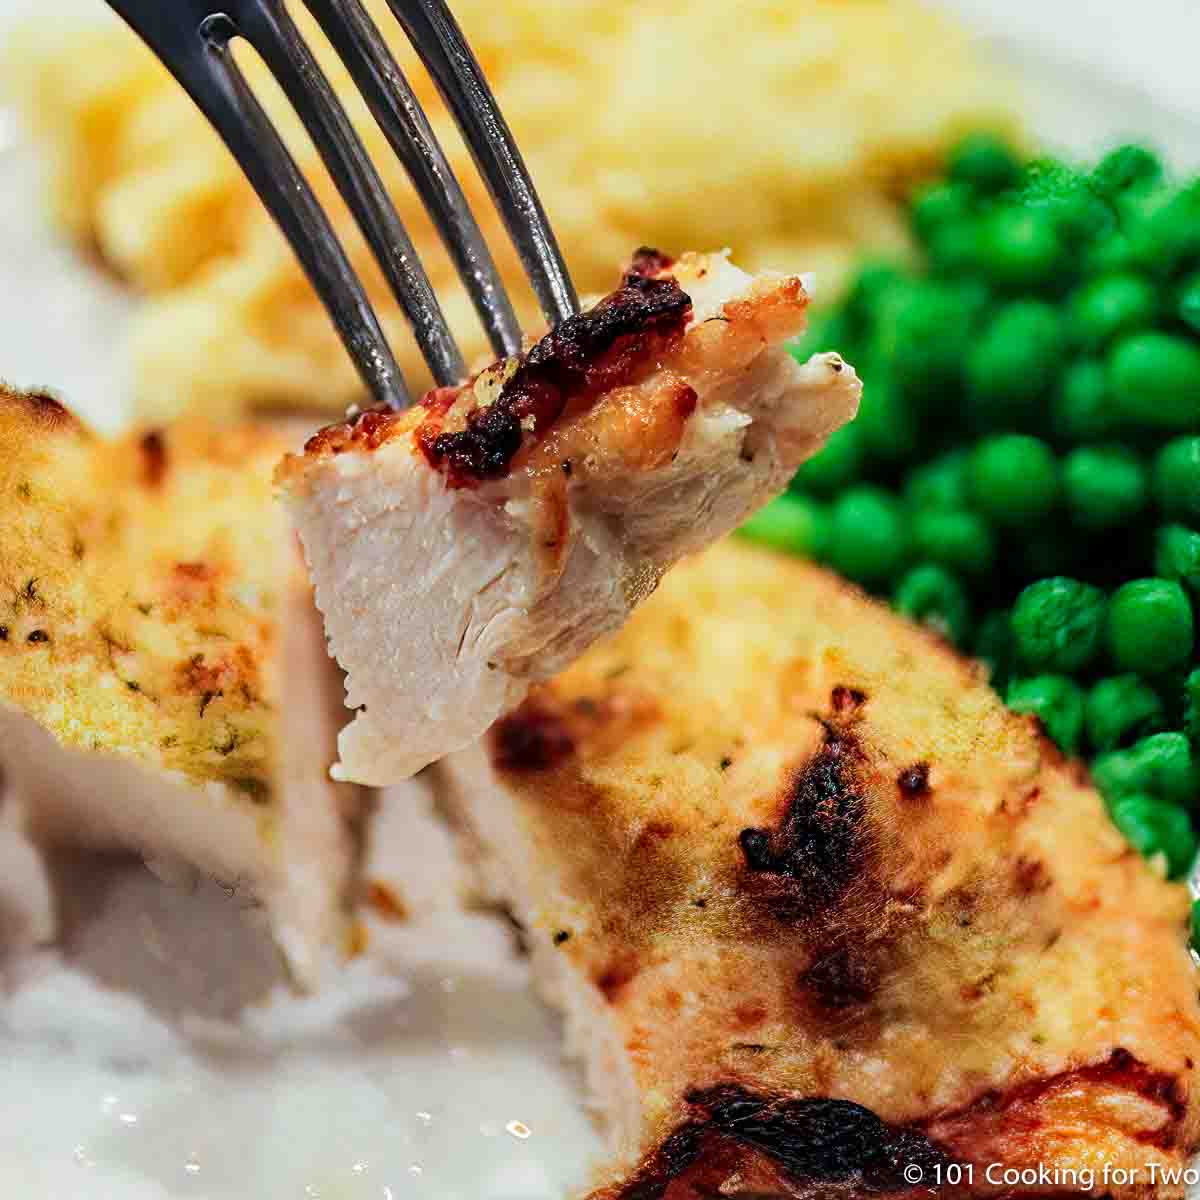 Parmesan Baked Chicken Breast on a fork.